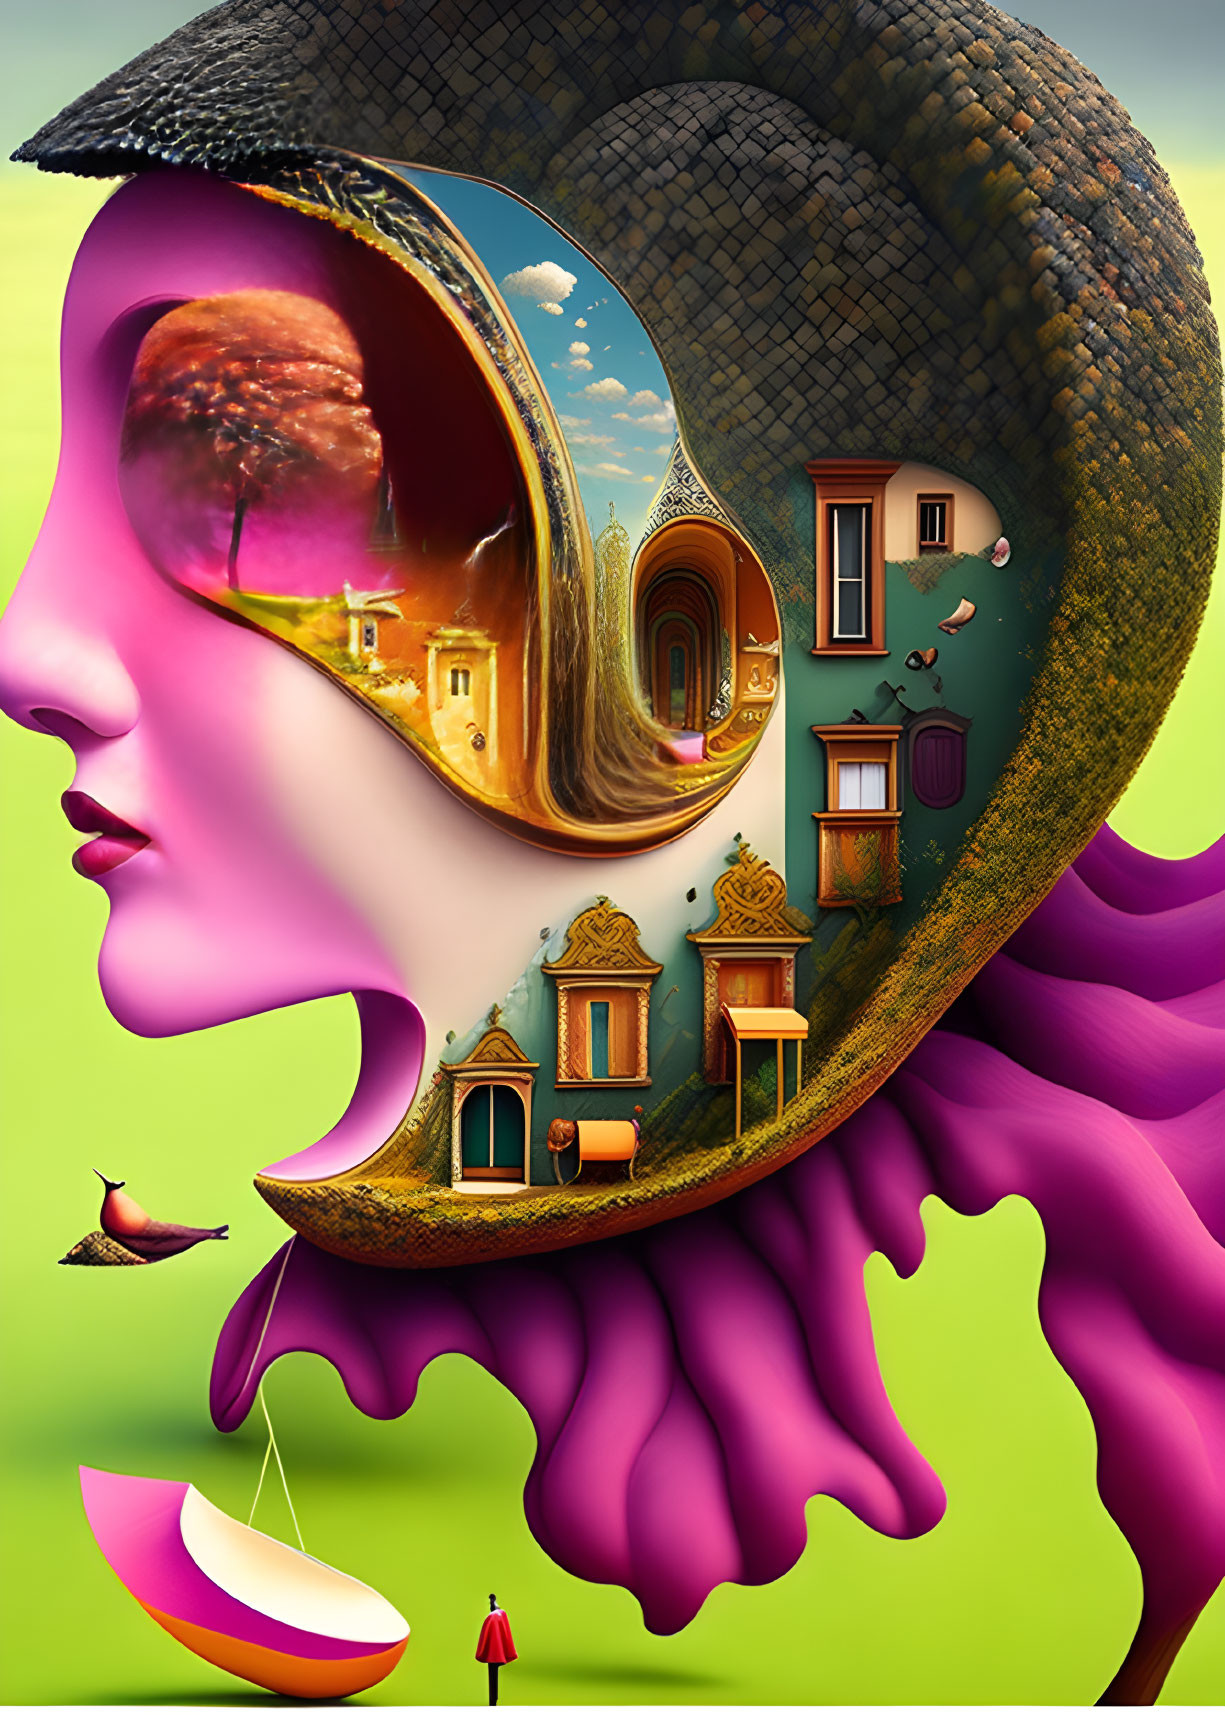 Surreal profile illustration with whimsical inner landscape